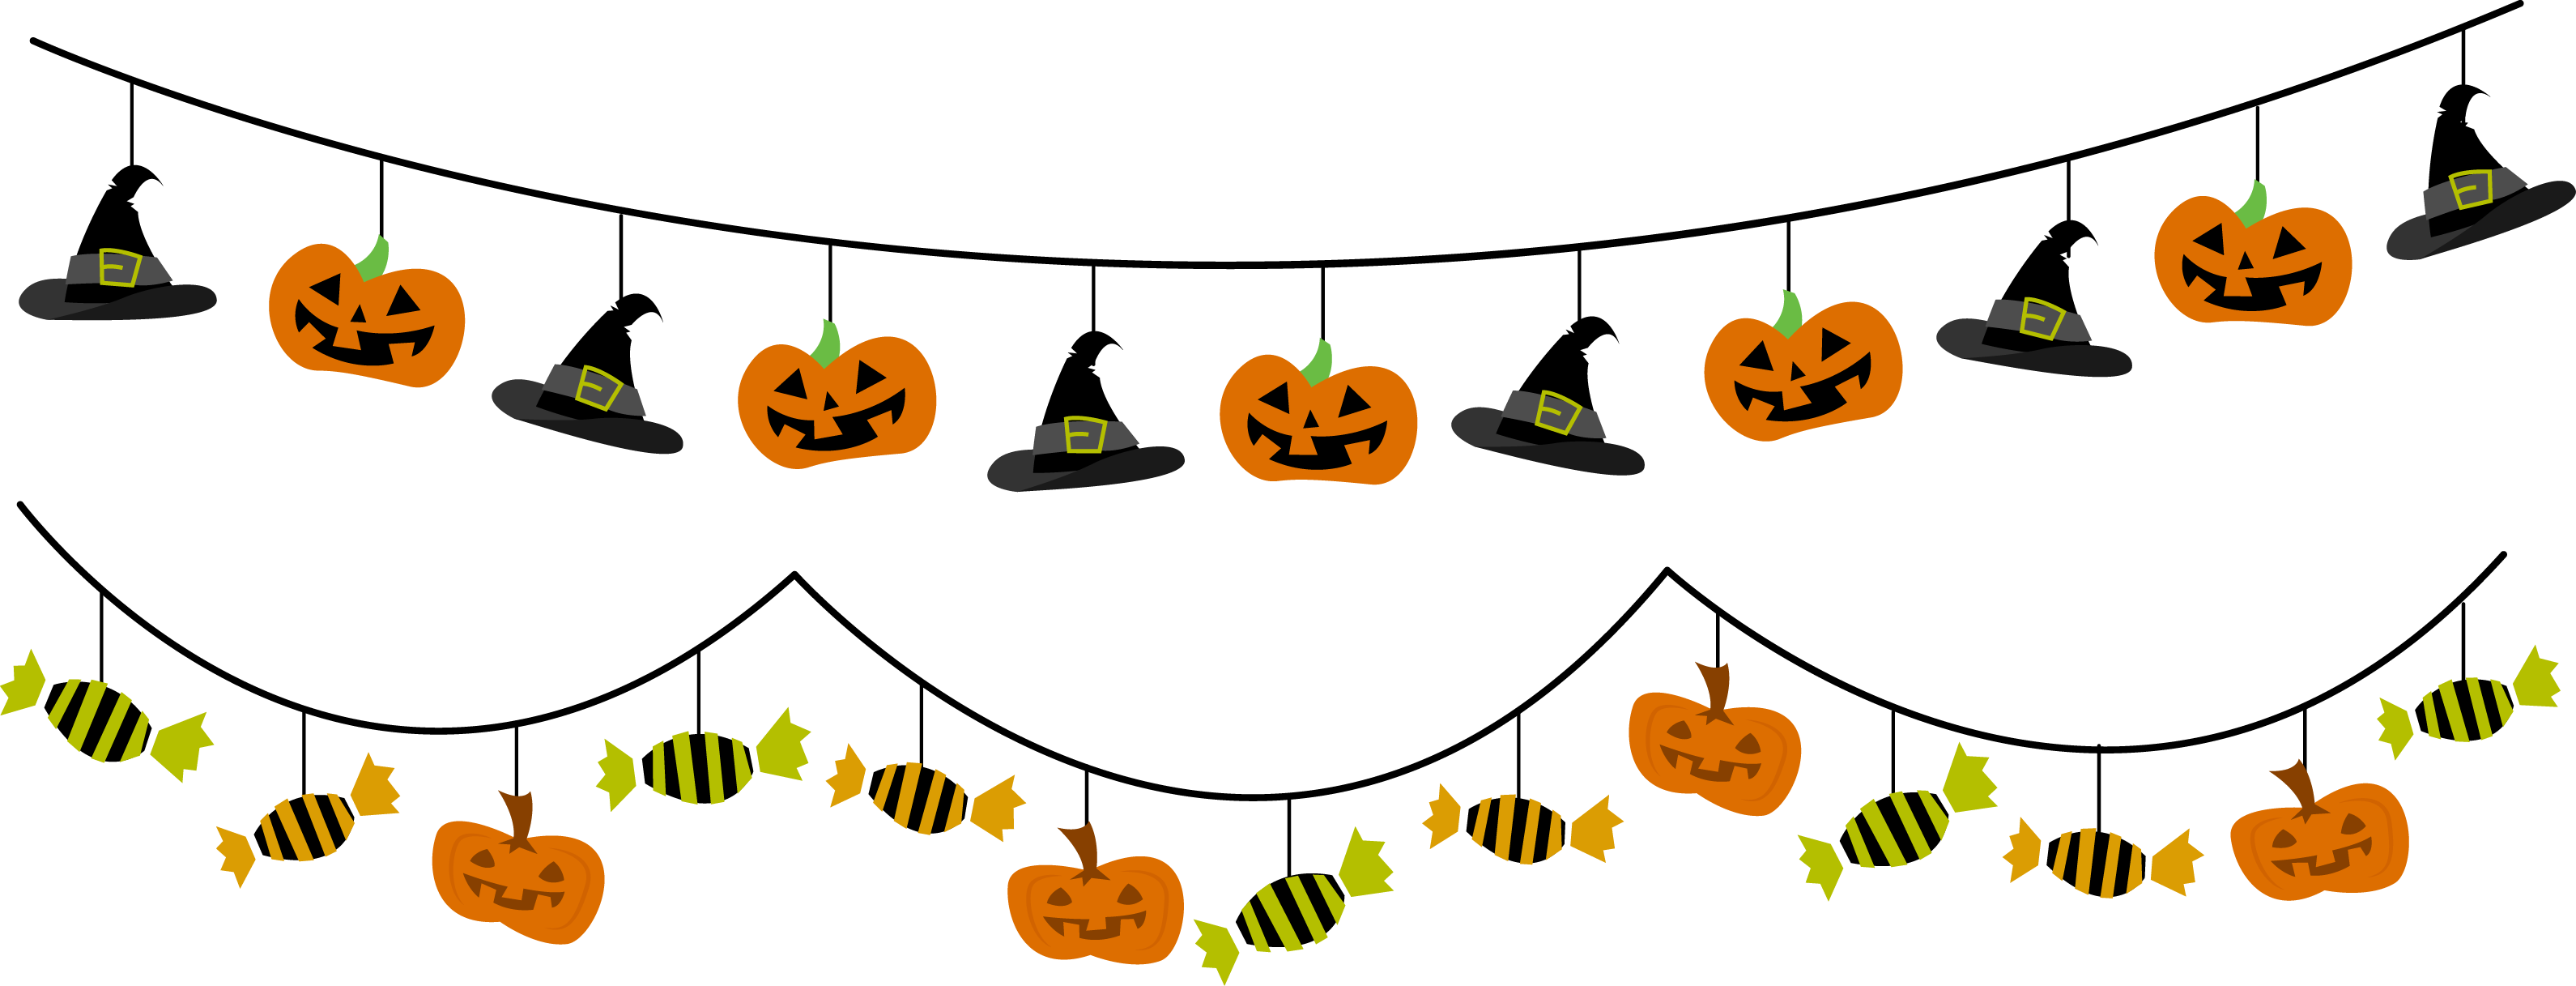 Download PNG image - Halloween Garland PNG Clipart 